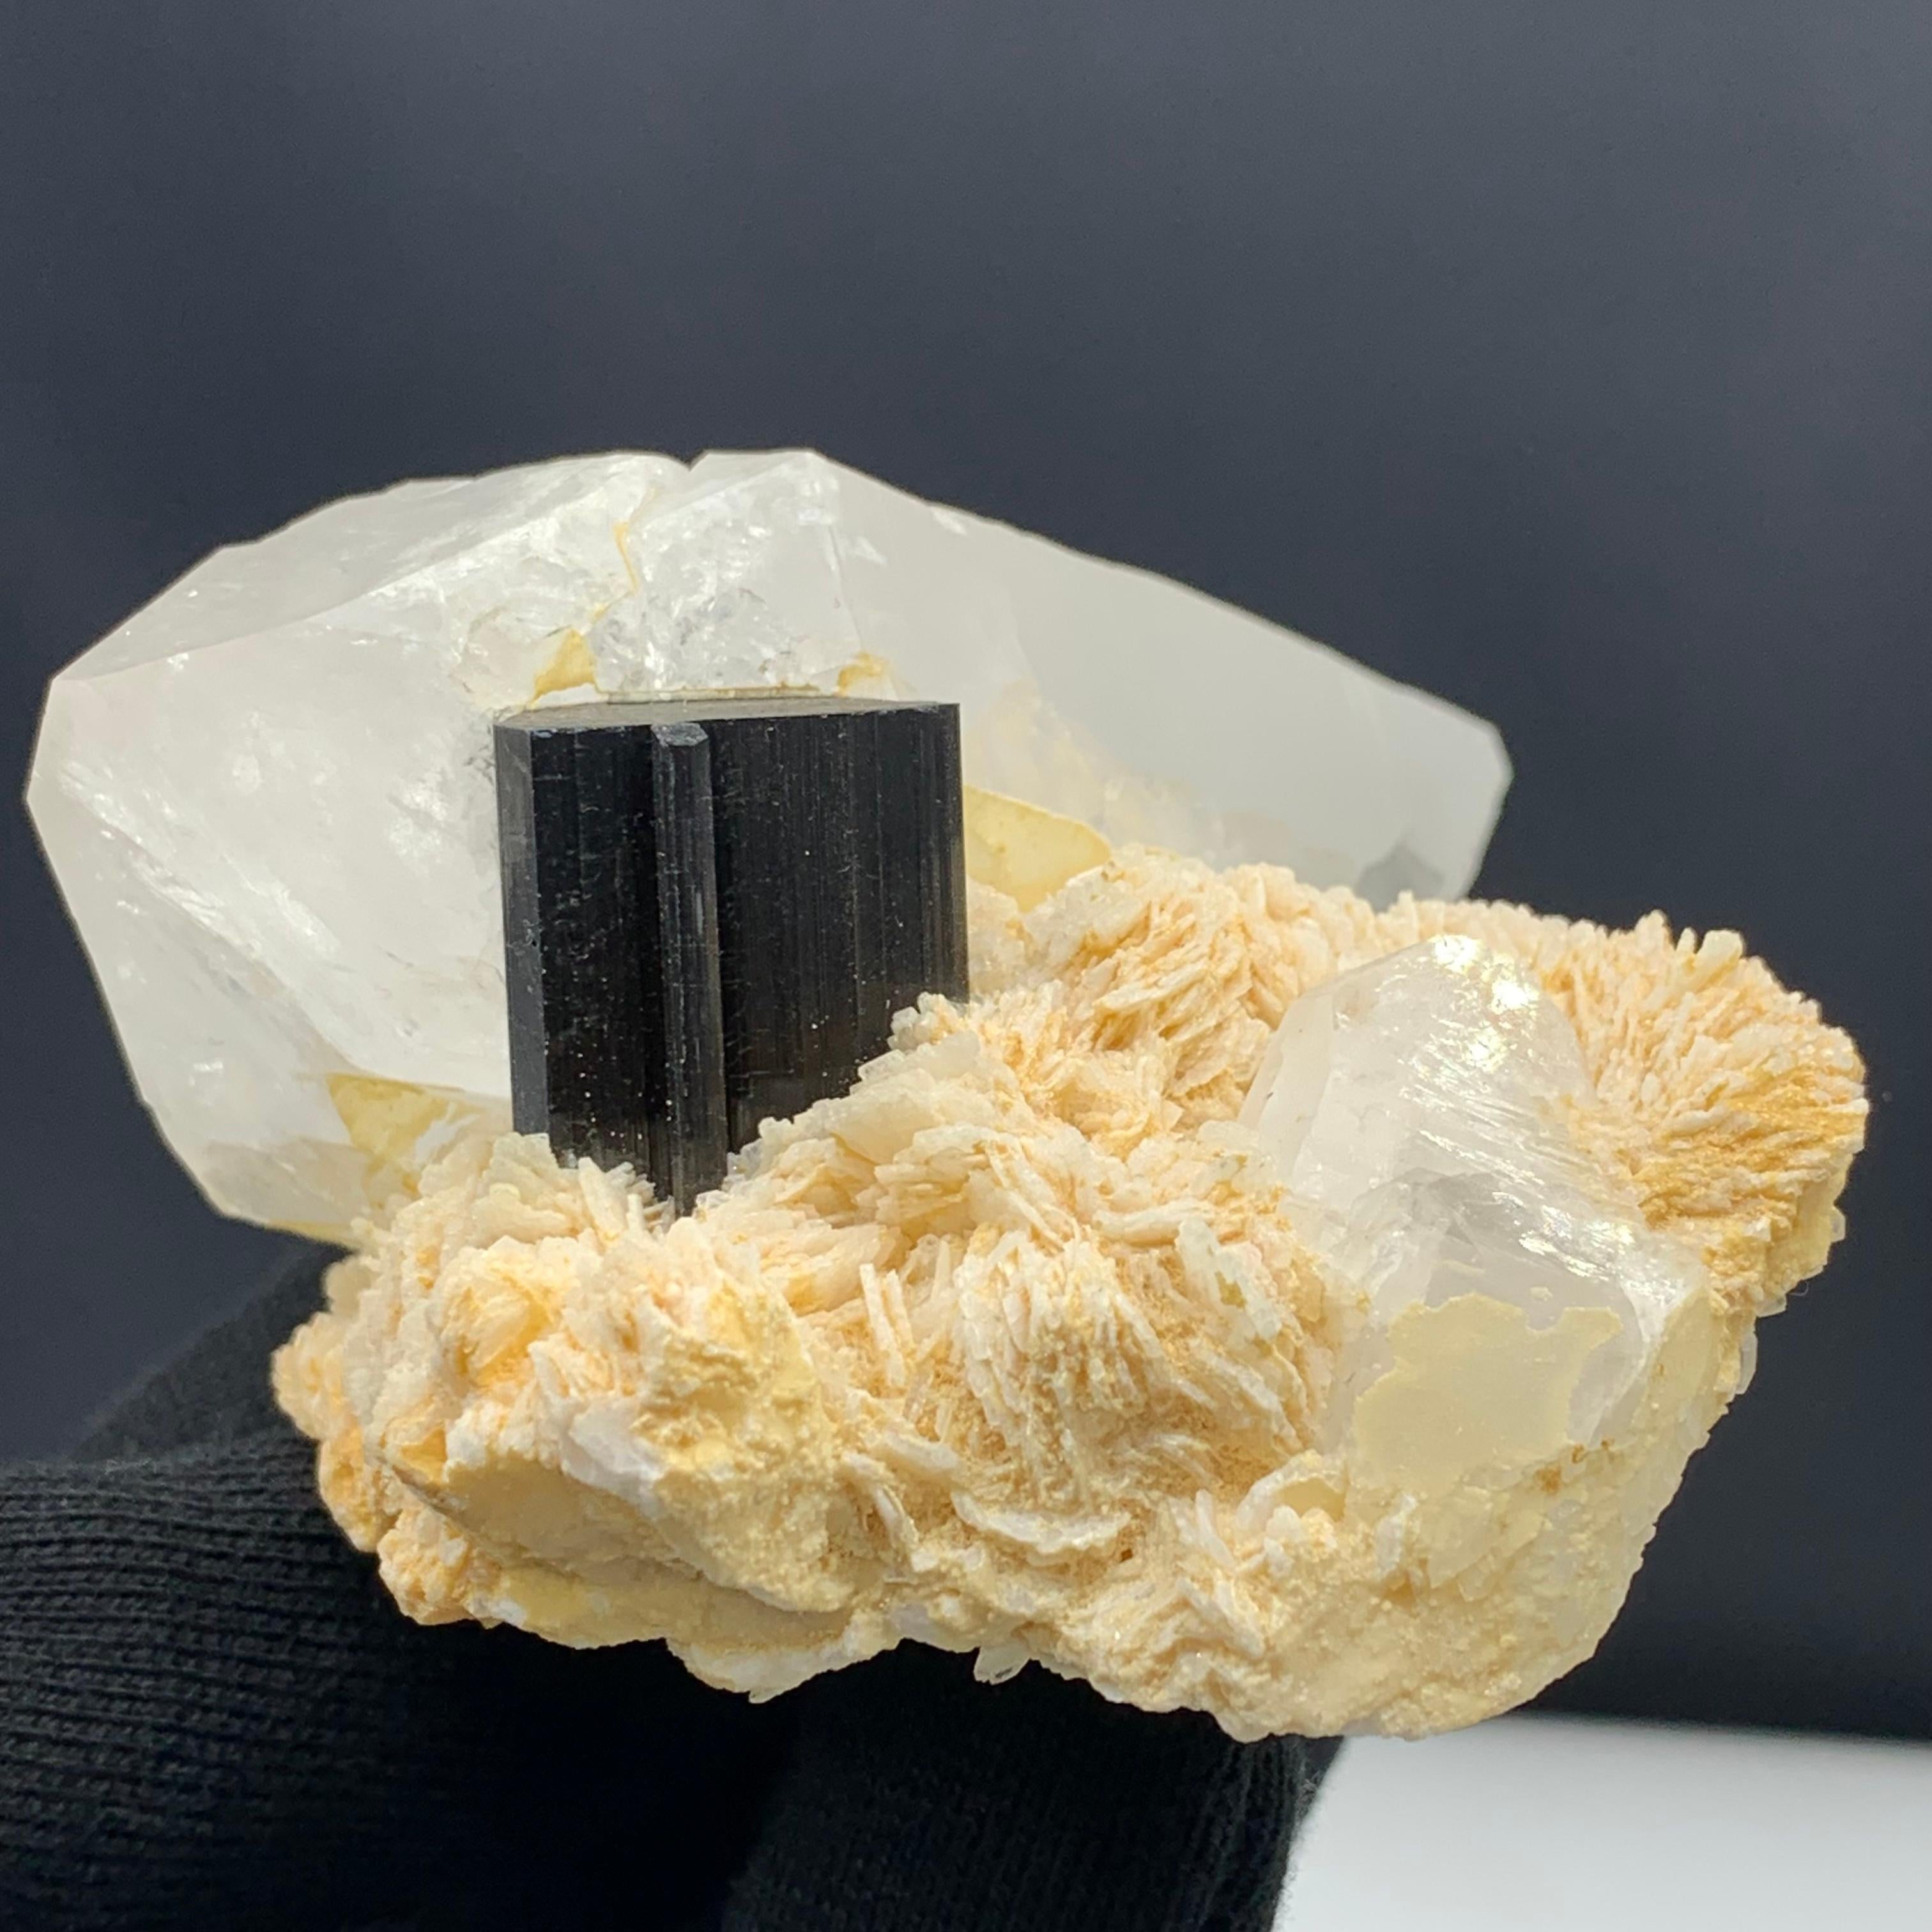 358.33 Gram Black Tourmaline Specimen with Quartz And Mica From Afghanistan 
Weight : 358.33 Gram
Dimension : 4.5 x 6.2 x 11.7 Cm
Origin: kunar, Afghanistan 

Tourmaline is a crystalline silicate mineral group in which boron is compounded with